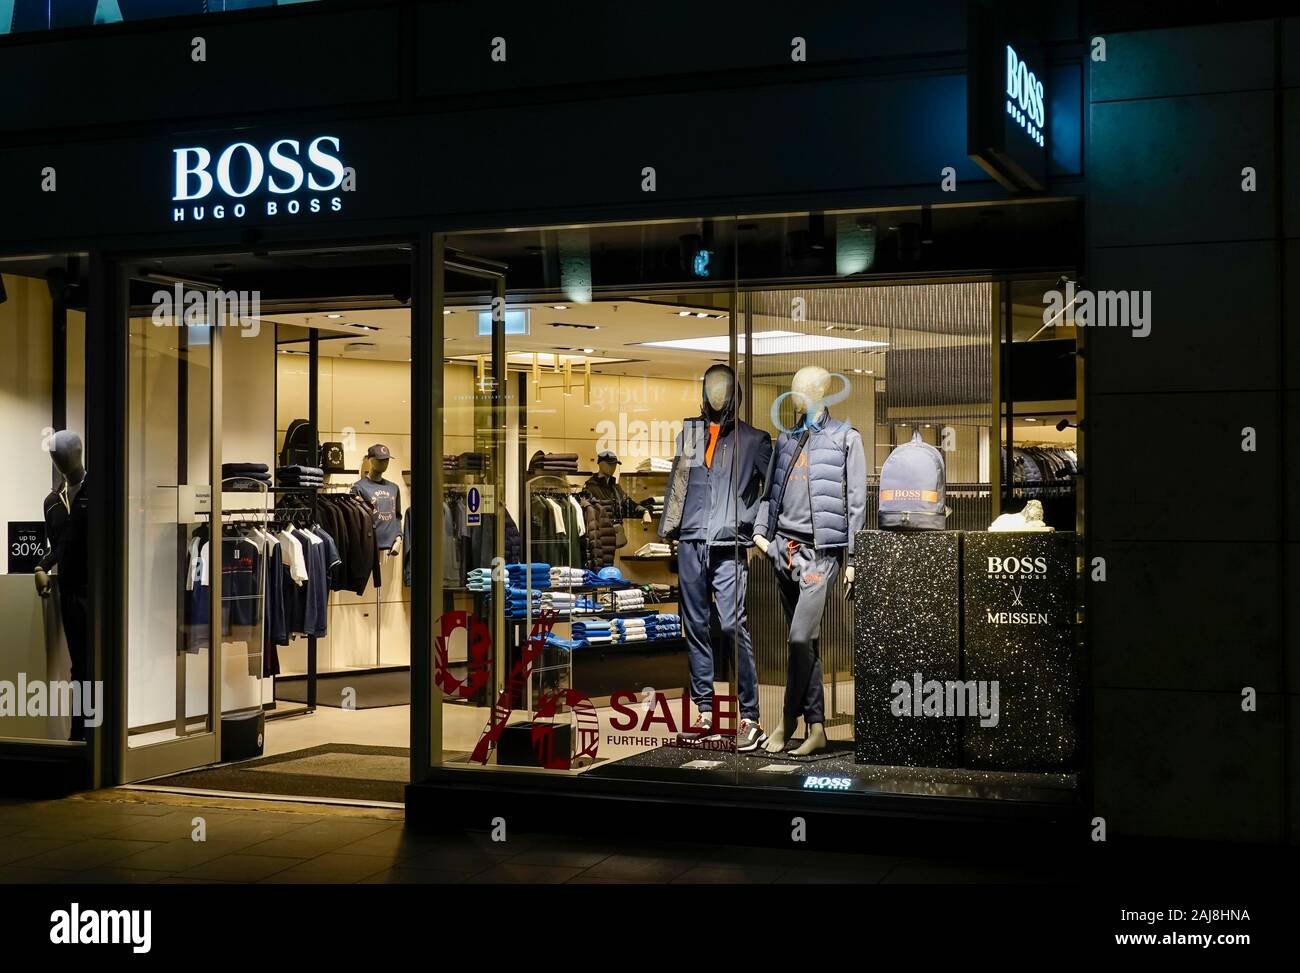 A Hugo Boss clothing store in Liverpool Stock Photo - Alamy